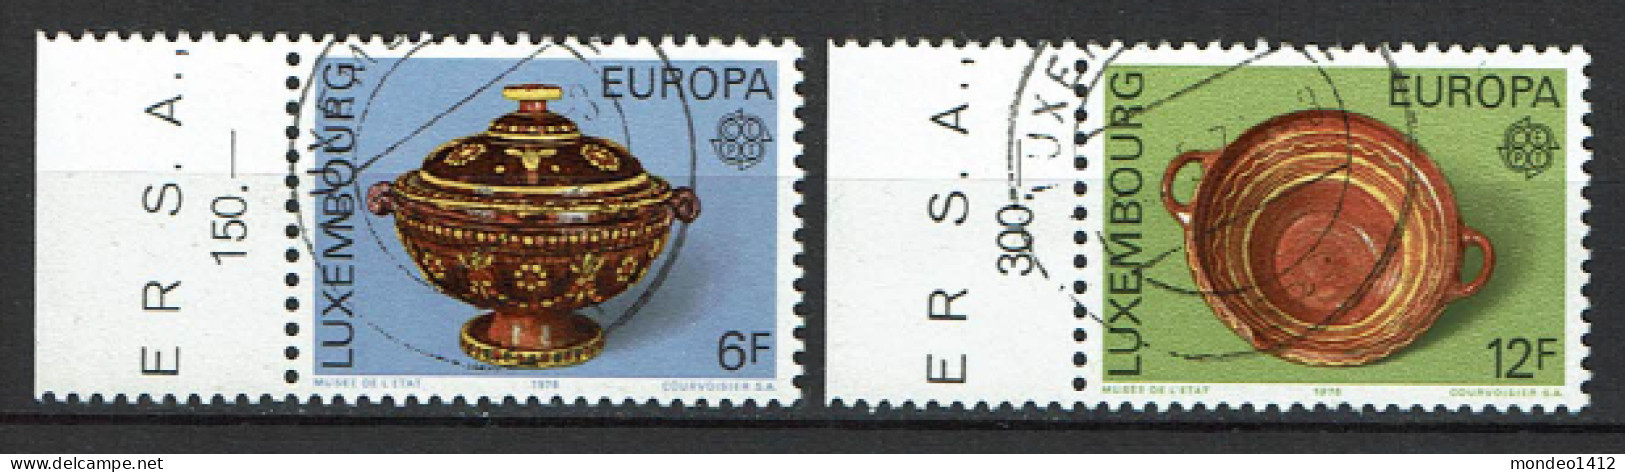 Luxembourg 1975 - YT 878/879 - EUROPA Stamps - Handicrafts, Oeuvres Artisanales - Oblitérés